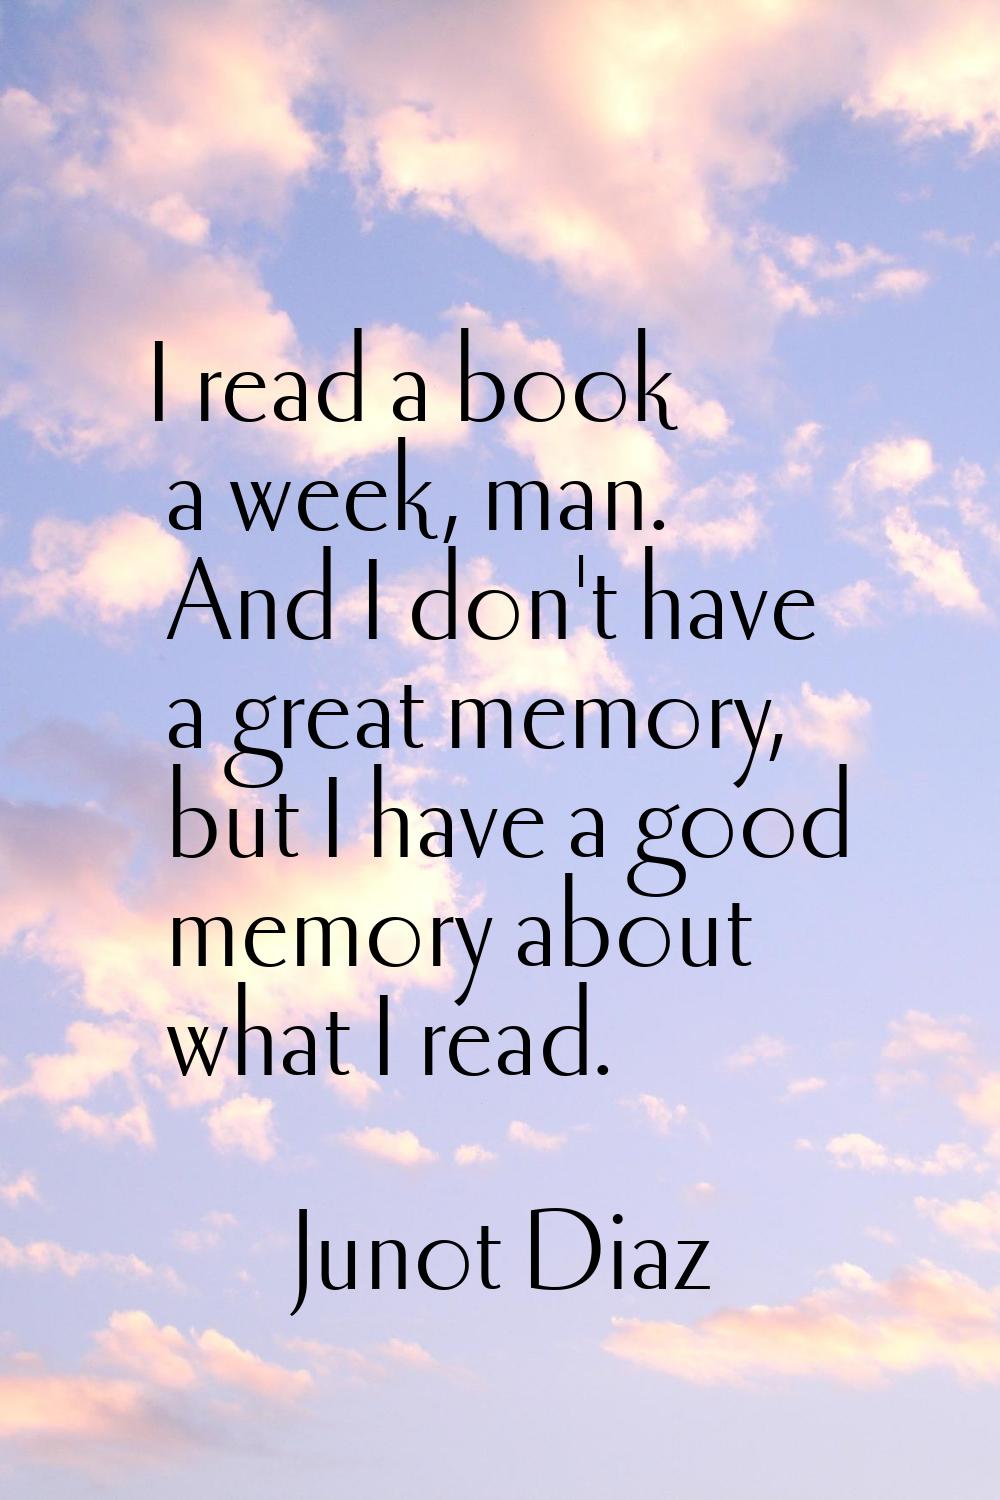 I read a book a week, man. And I don't have a great memory, but I have a good memory about what I r